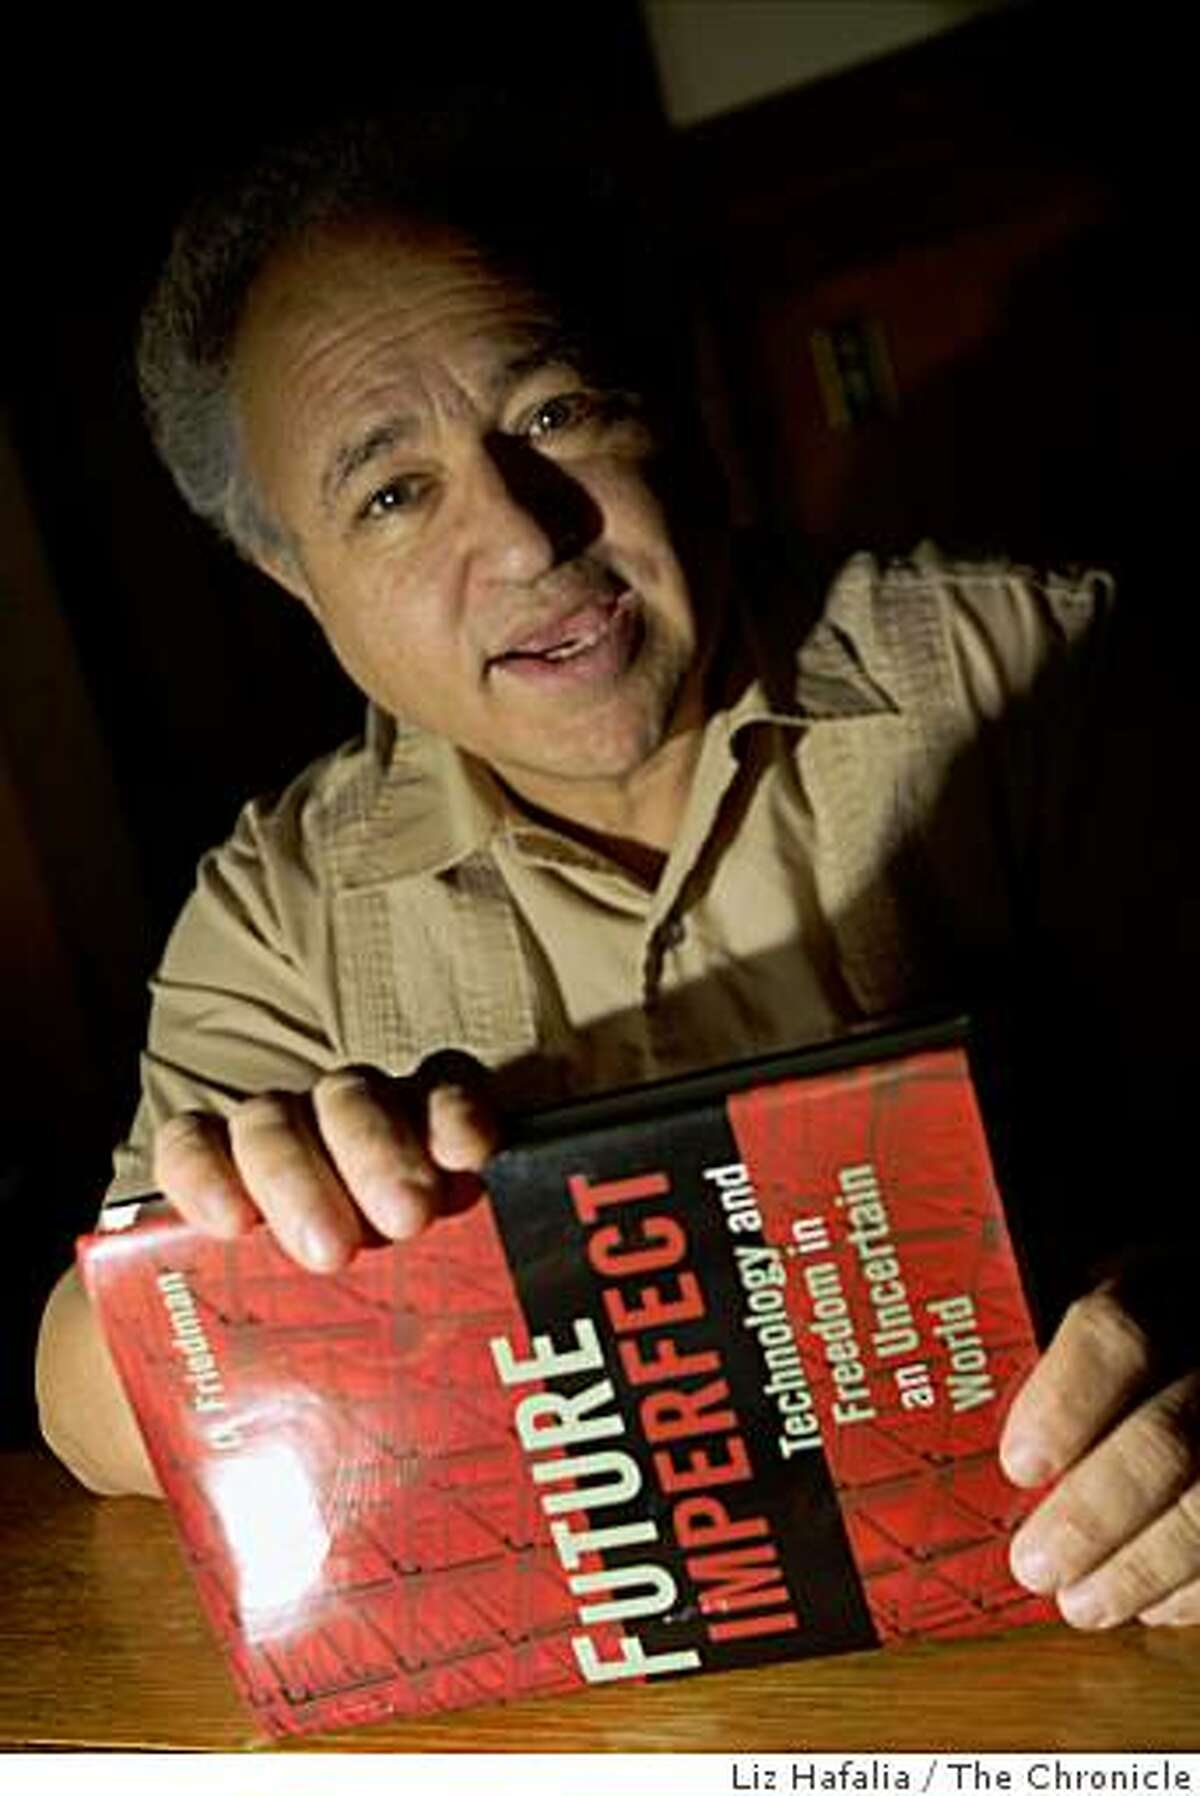 Santa Clara University Law Professor David Friedman at home in San Jose, Calif., talking about his latest book, "Future Imperfect," which takes a provocative look at the upside consequences of technology, on Monday, September 15, 2008.